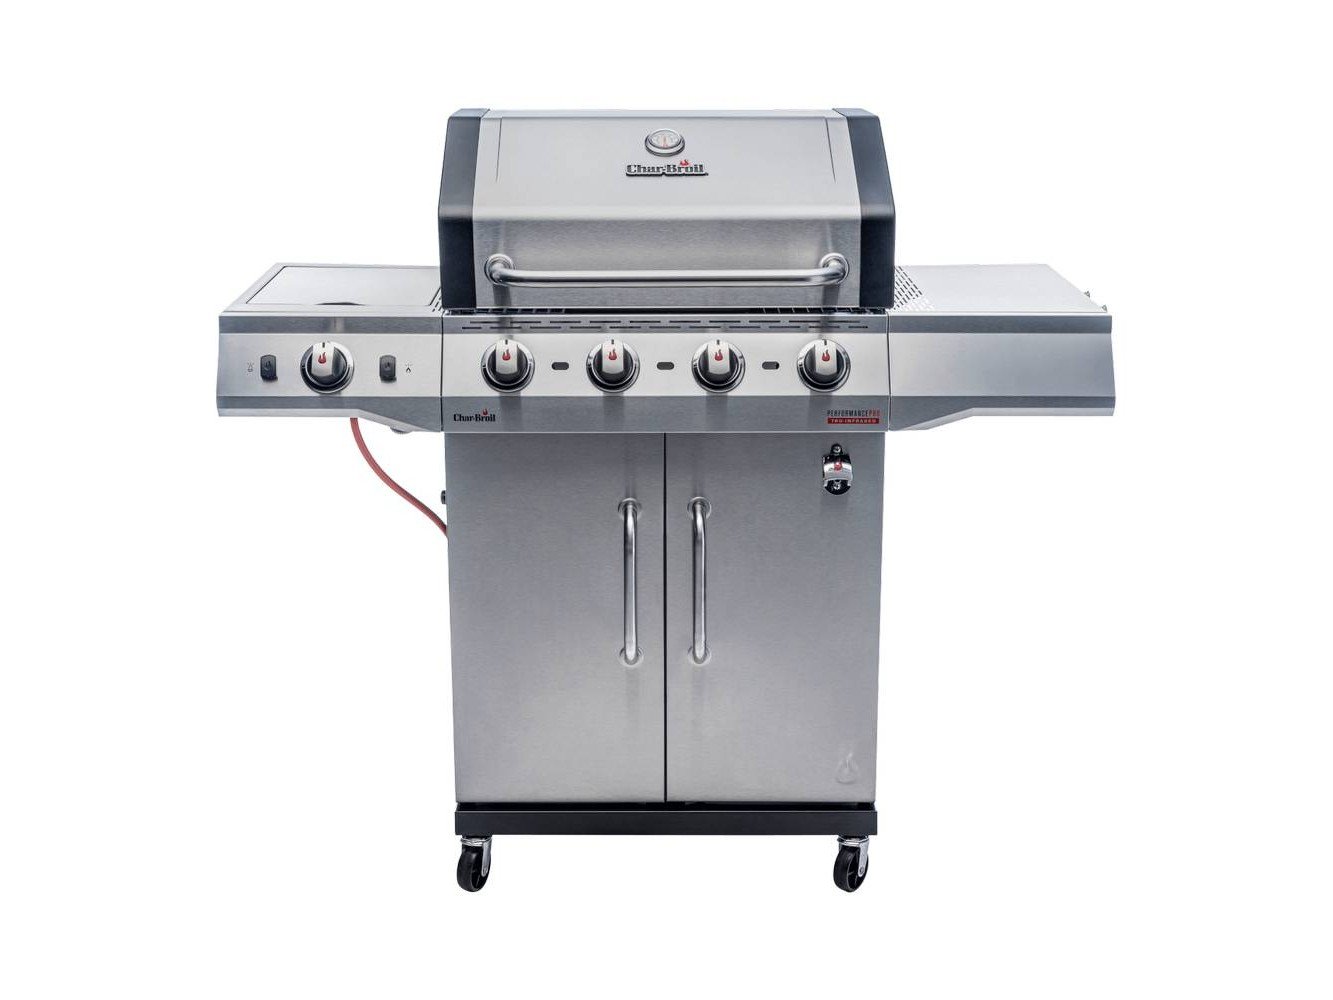 Char-Broil Performance Pro S 4